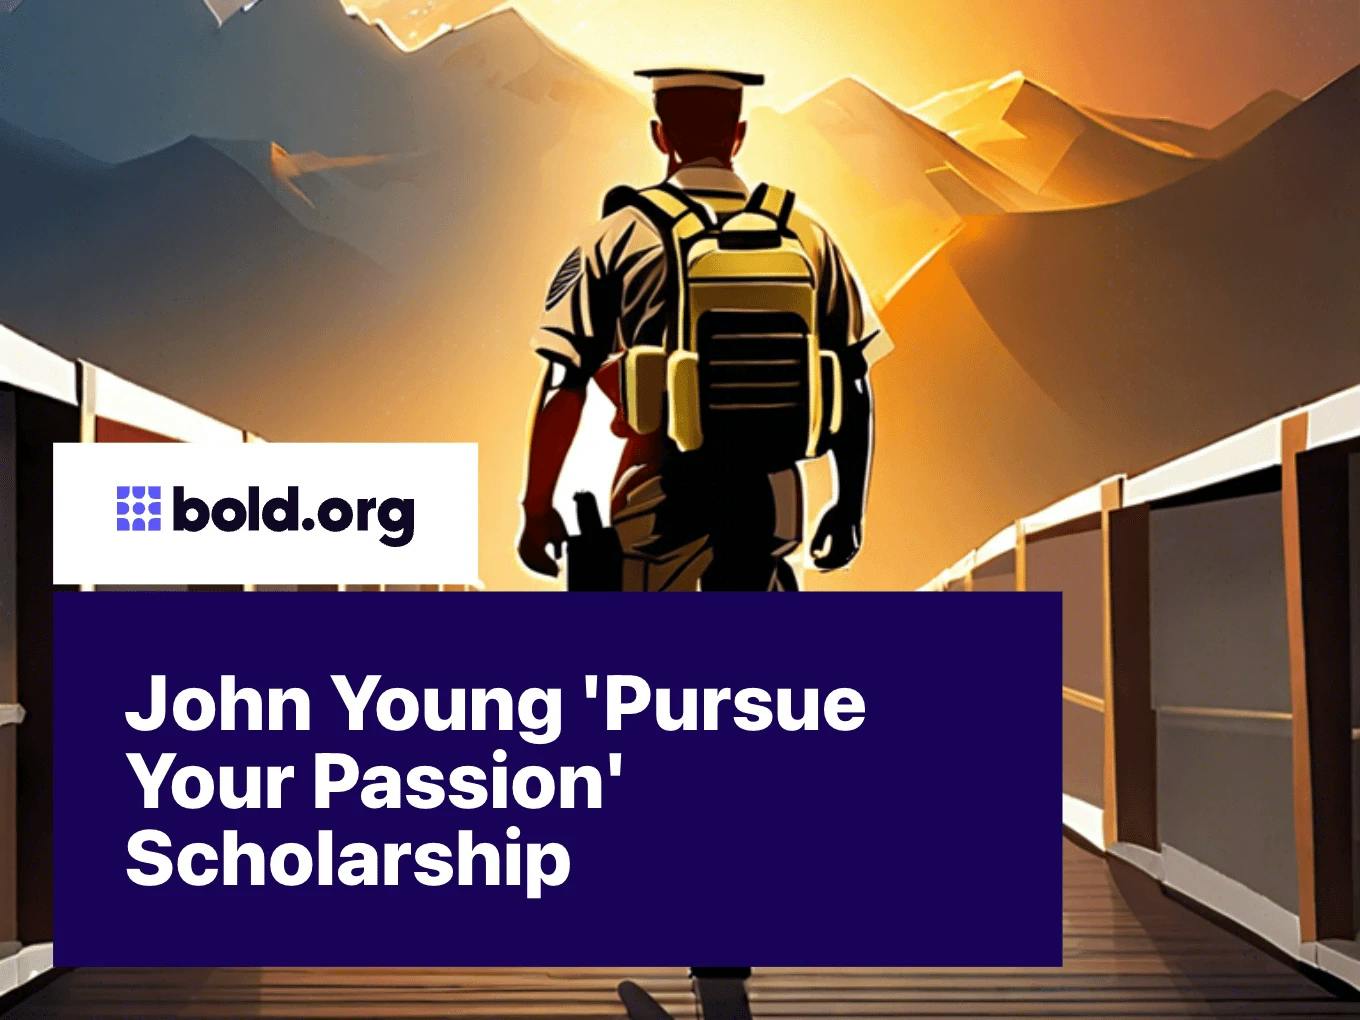 John Young 'Pursue Your Passion' Scholarship